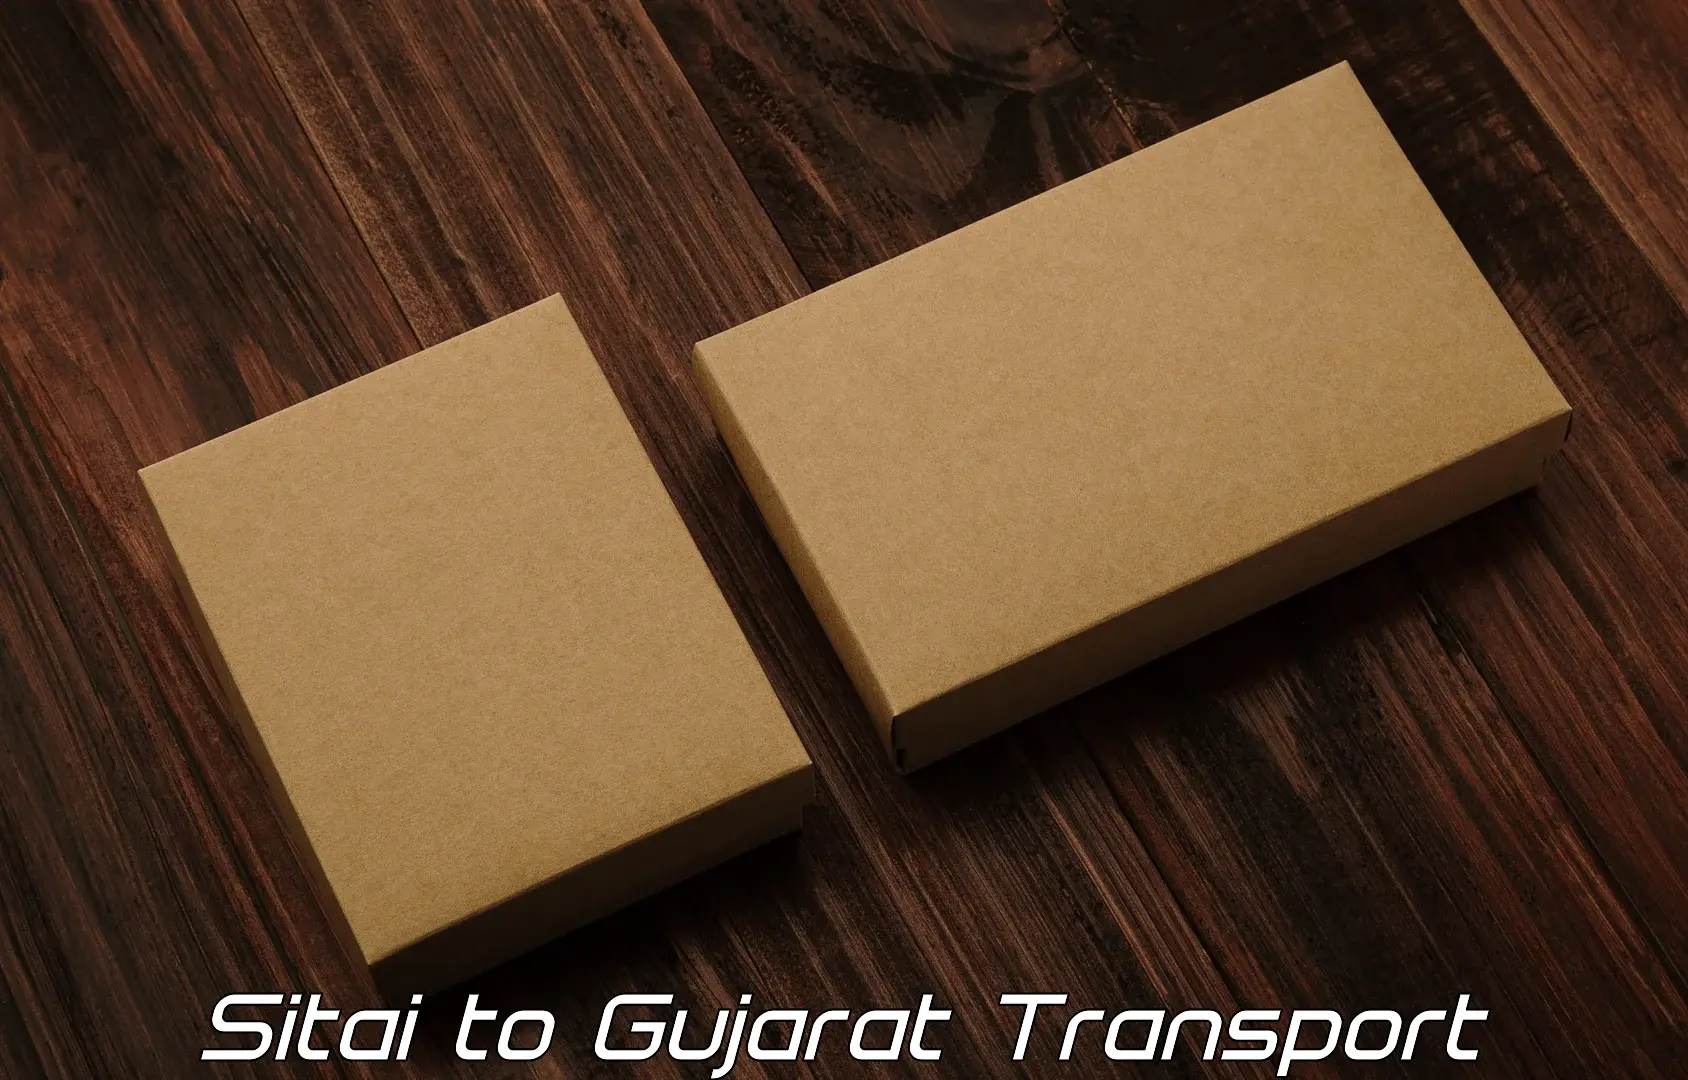 Container transport service Sitai to Gujarat